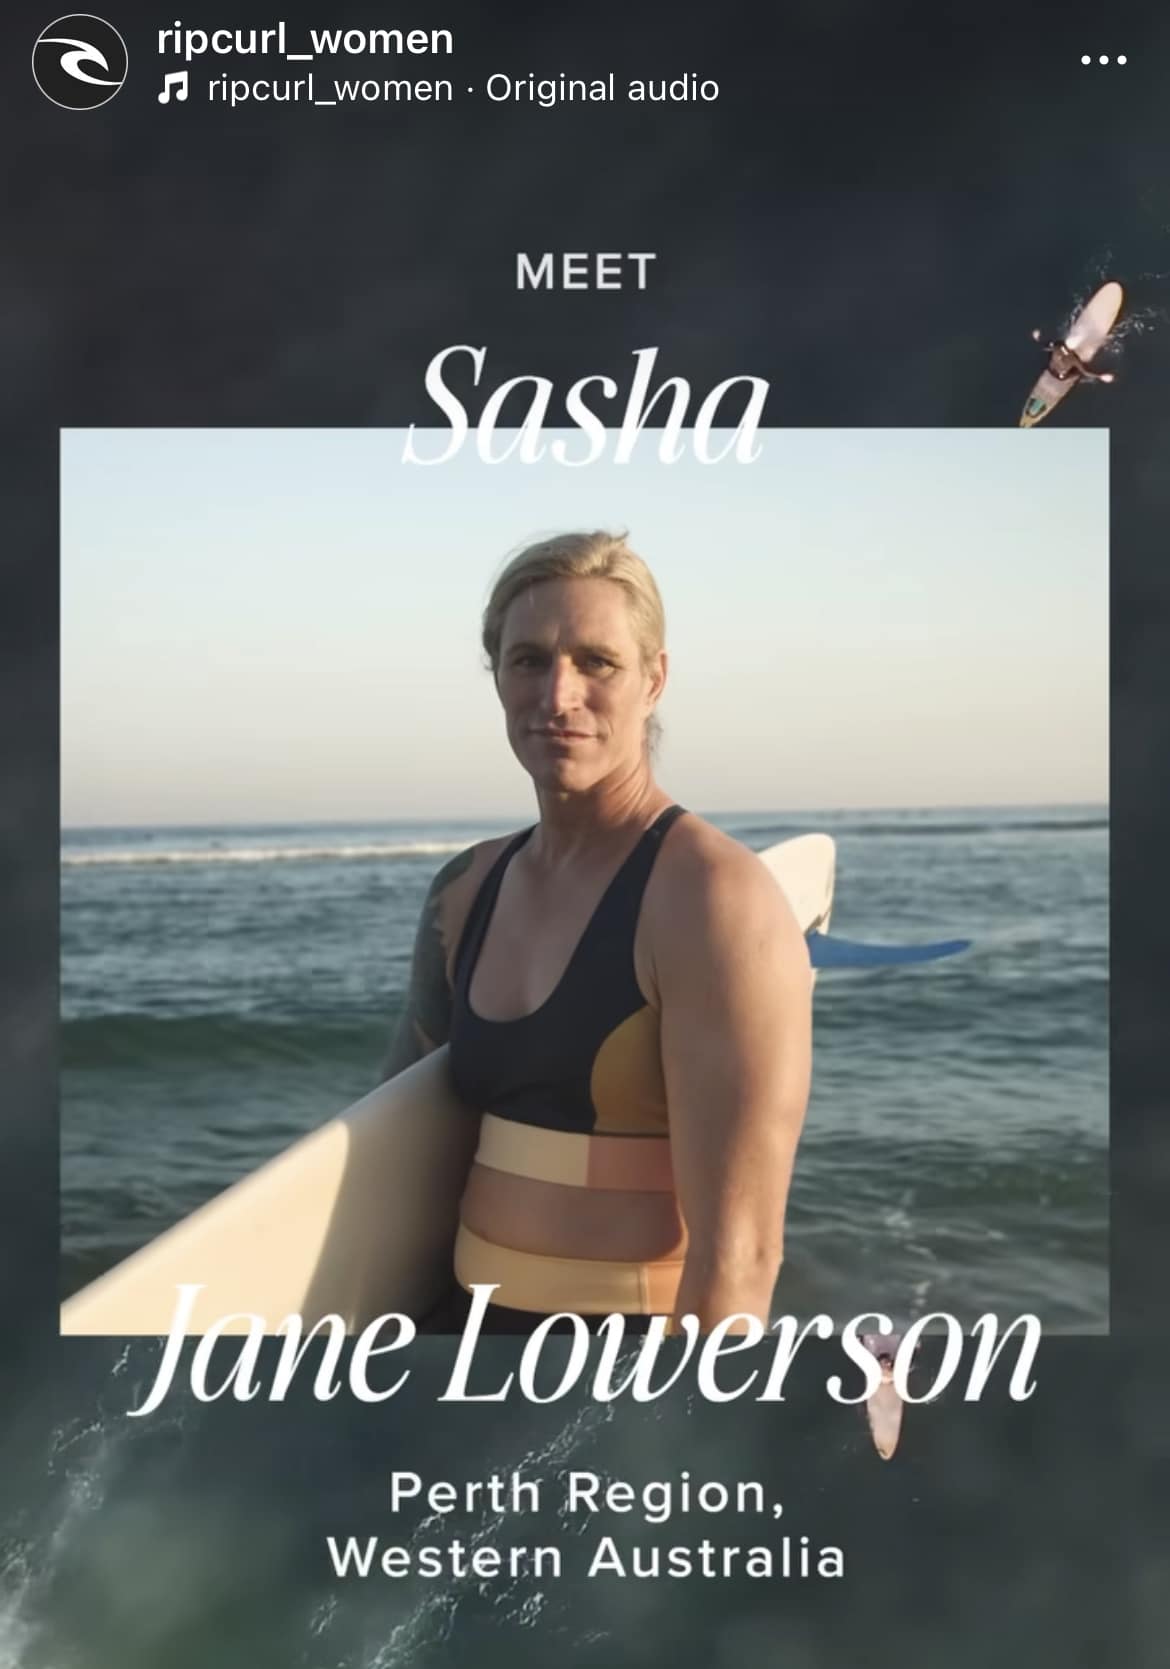 Sasha Jane Lowerson deleted ater Boycott Rip Curl trended